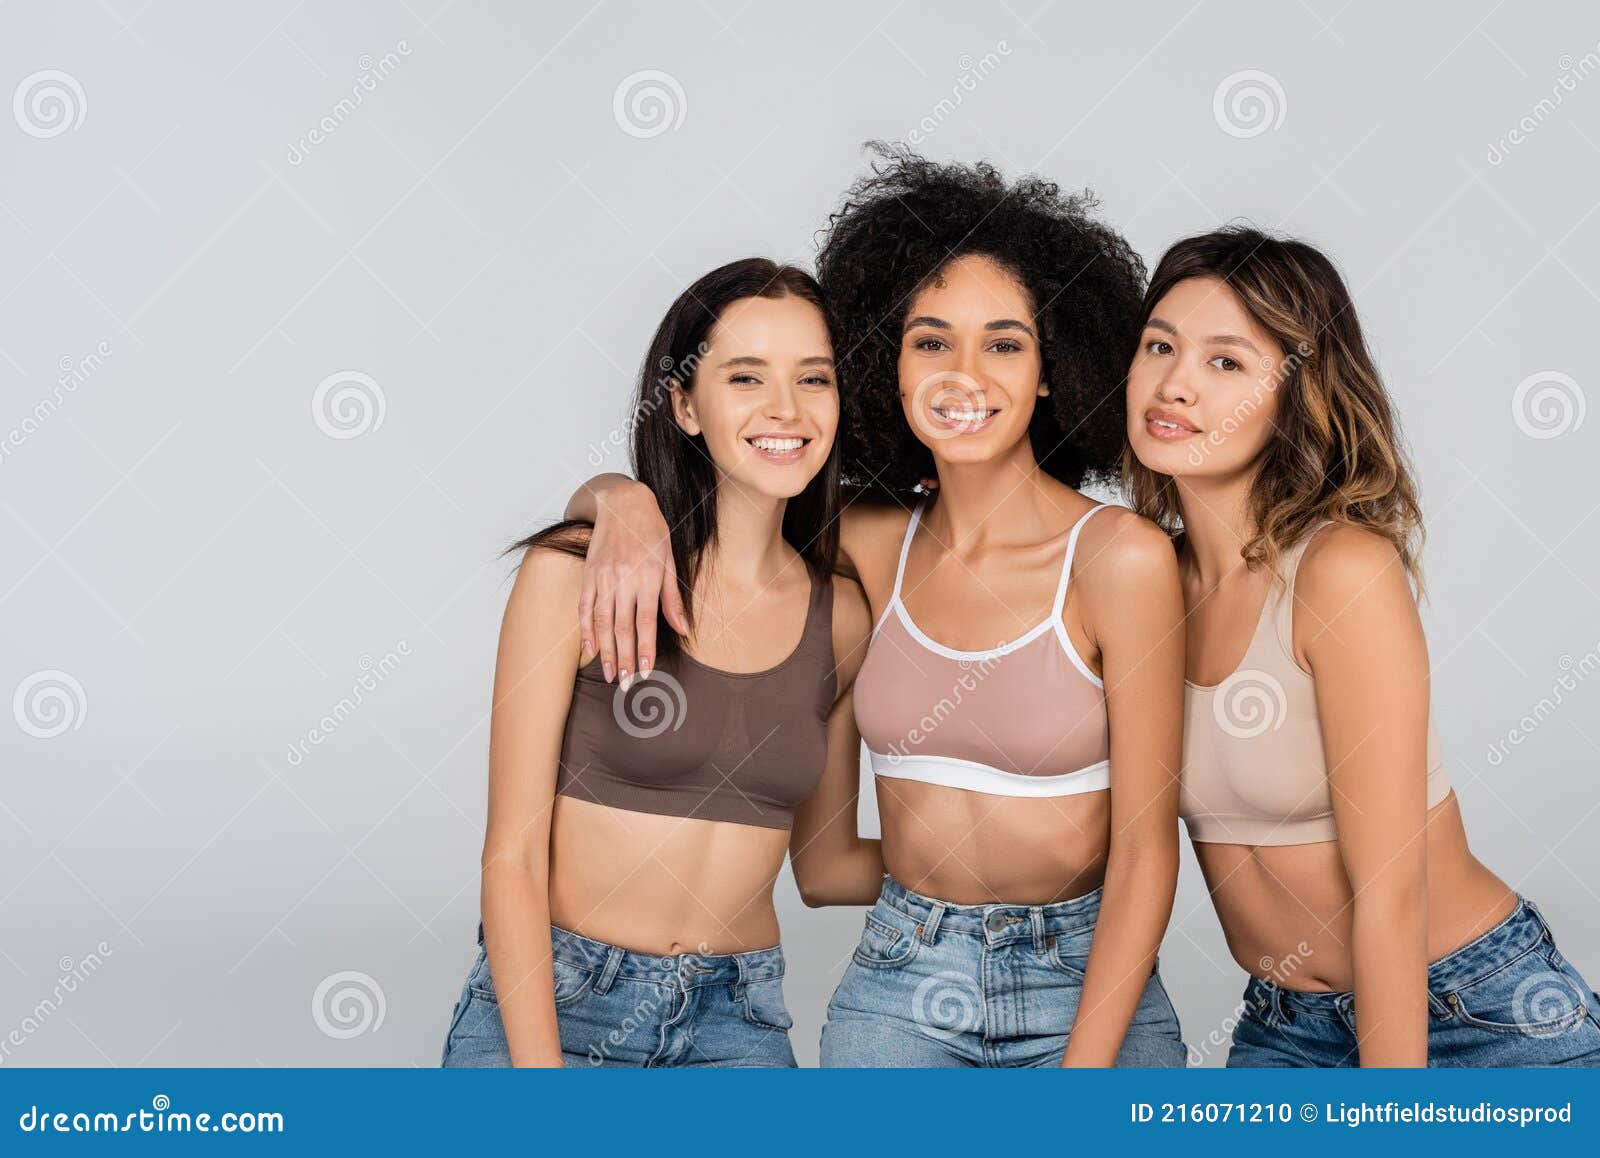 Young Interracial Women in Jeans and Stock Photo - Image of beauty, joyful:  216071210